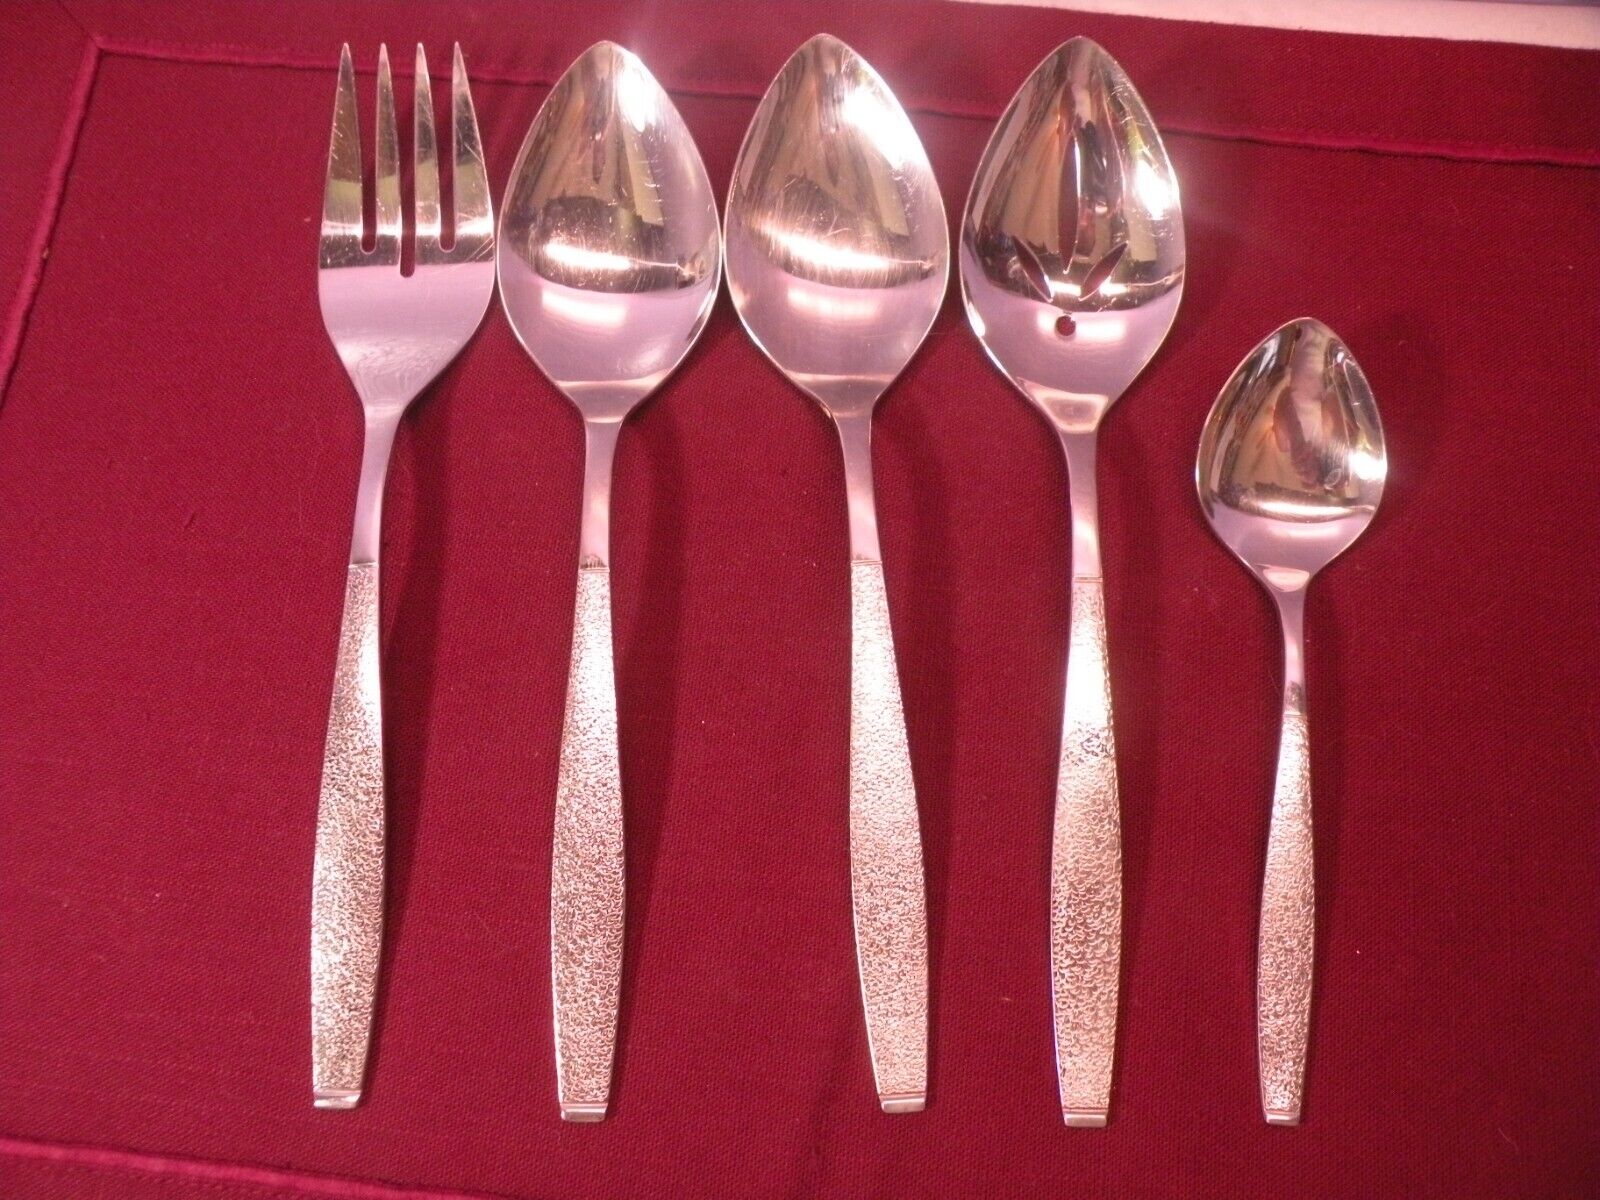 5 Serving Pieces 1881 Rogers Oneida Ltd Stainless Montina Indio Spoons Fork Suga